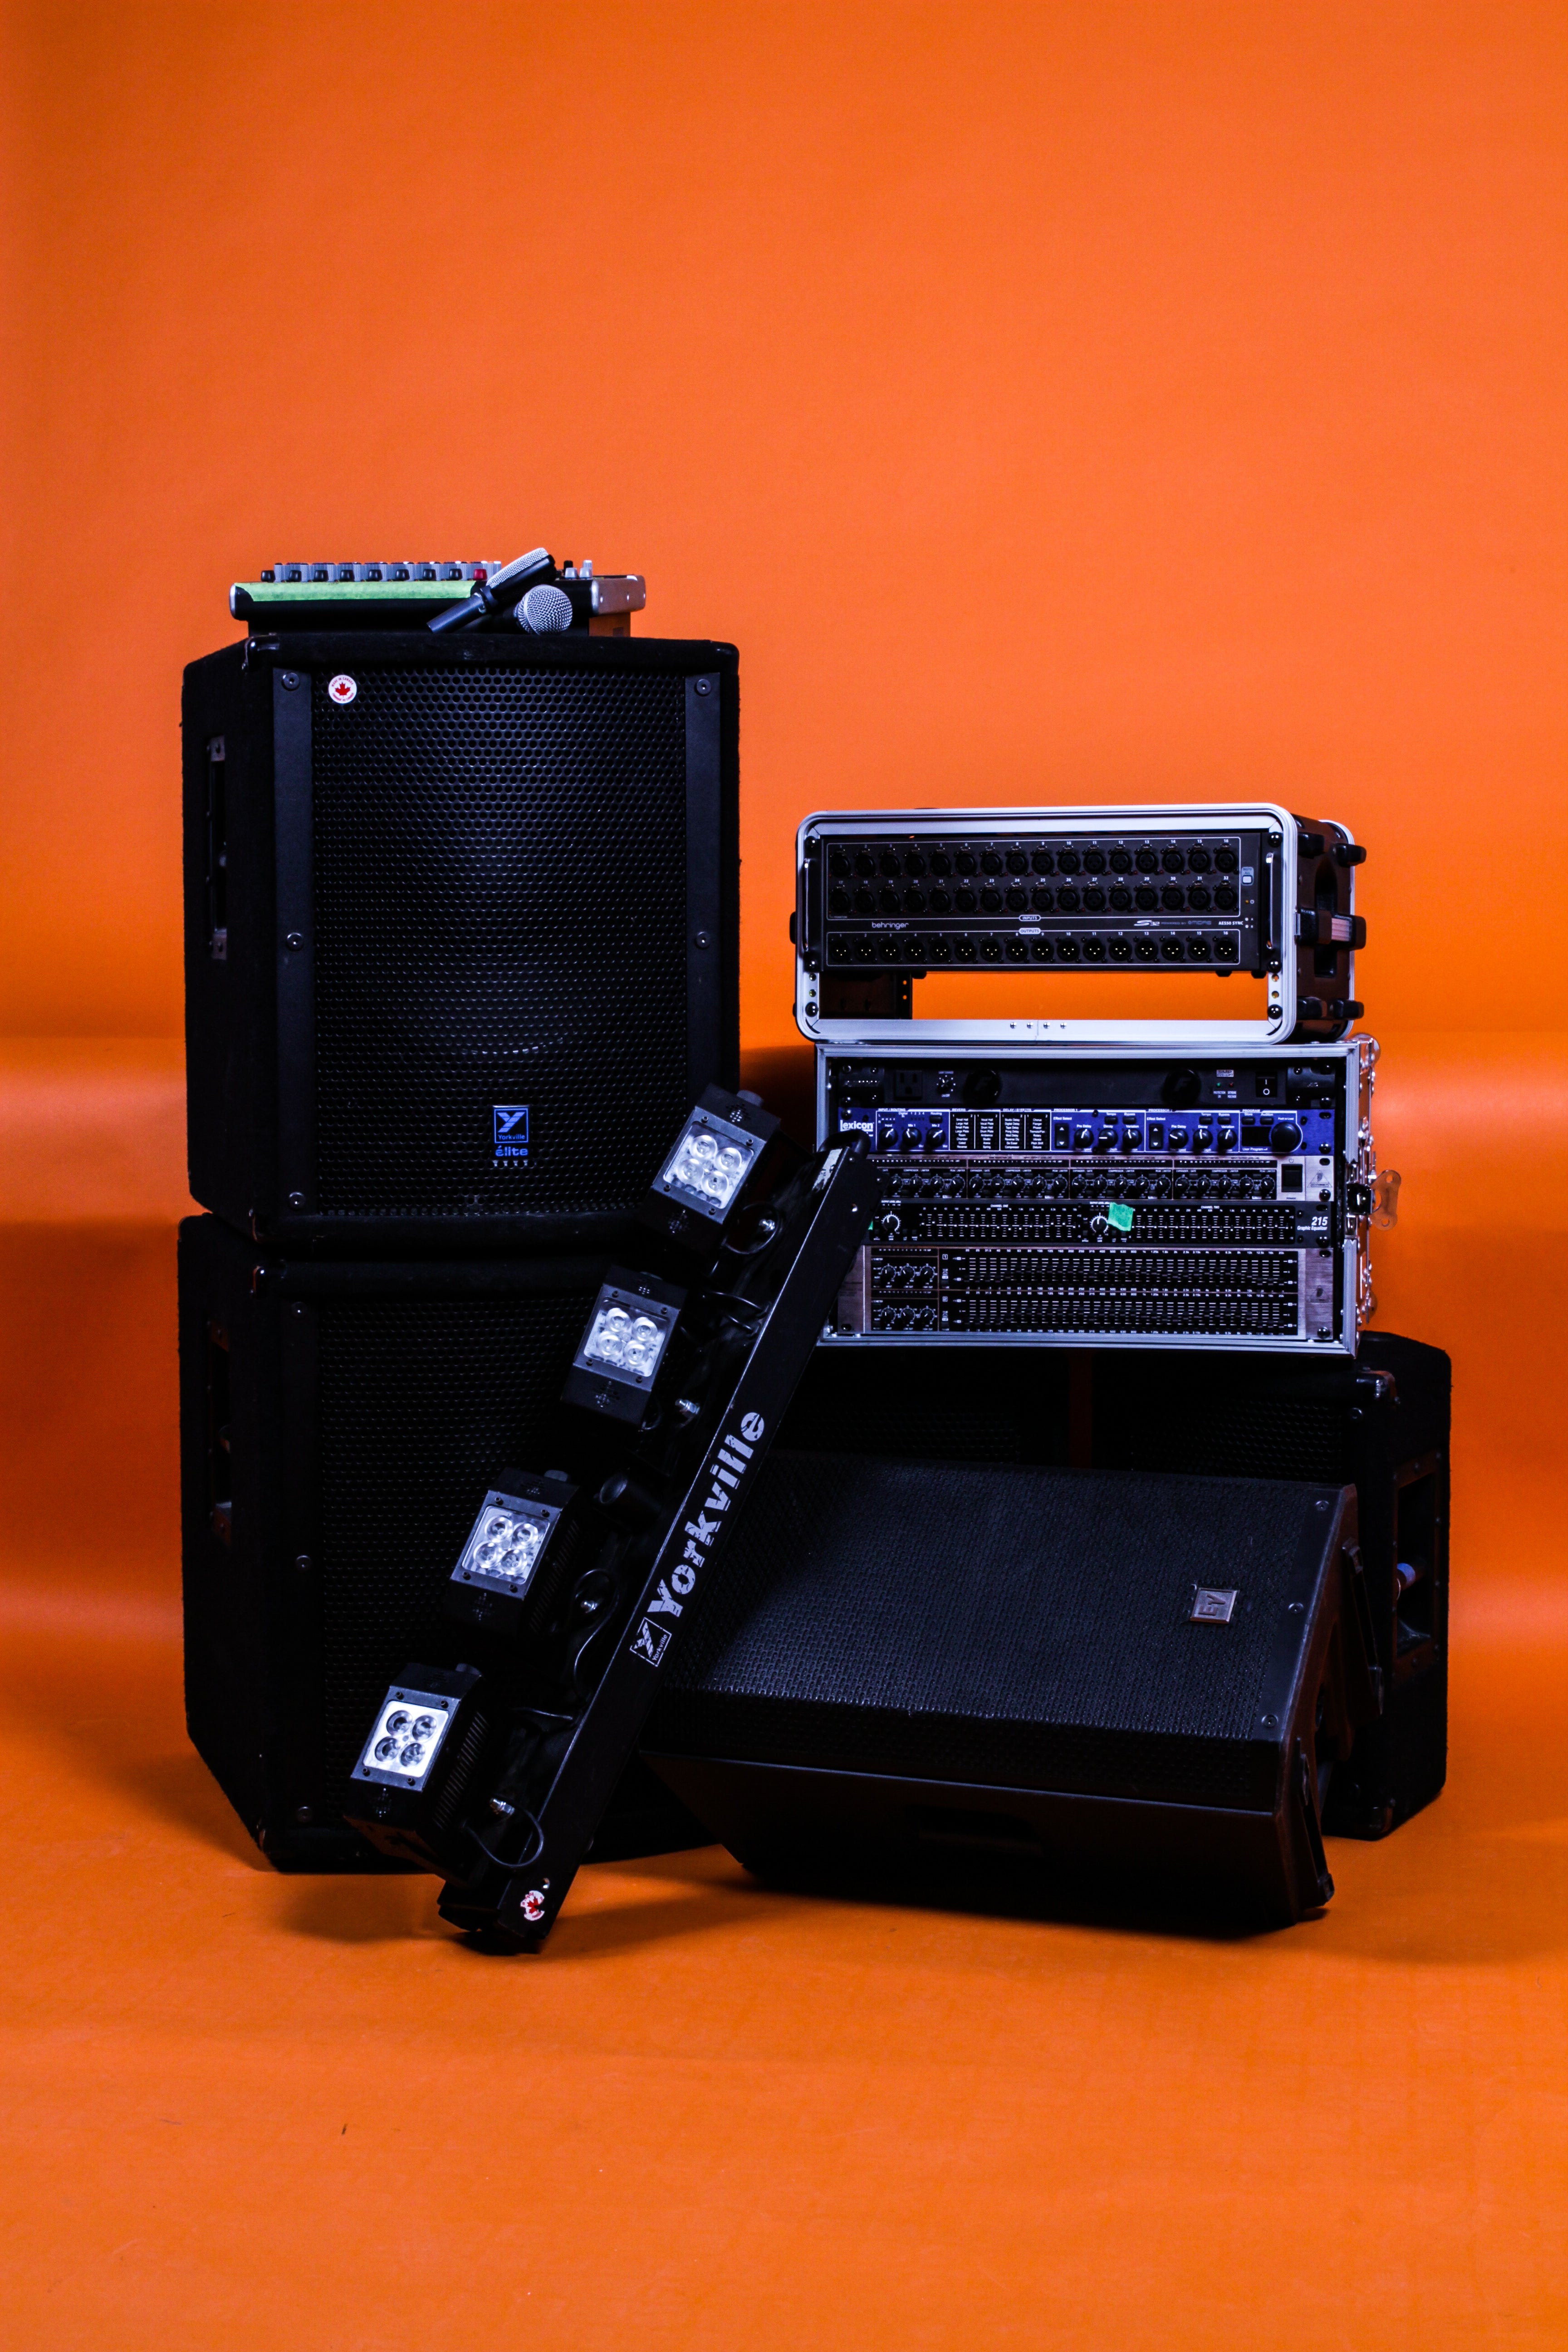 event and sound production equipment displayed in front of orange background